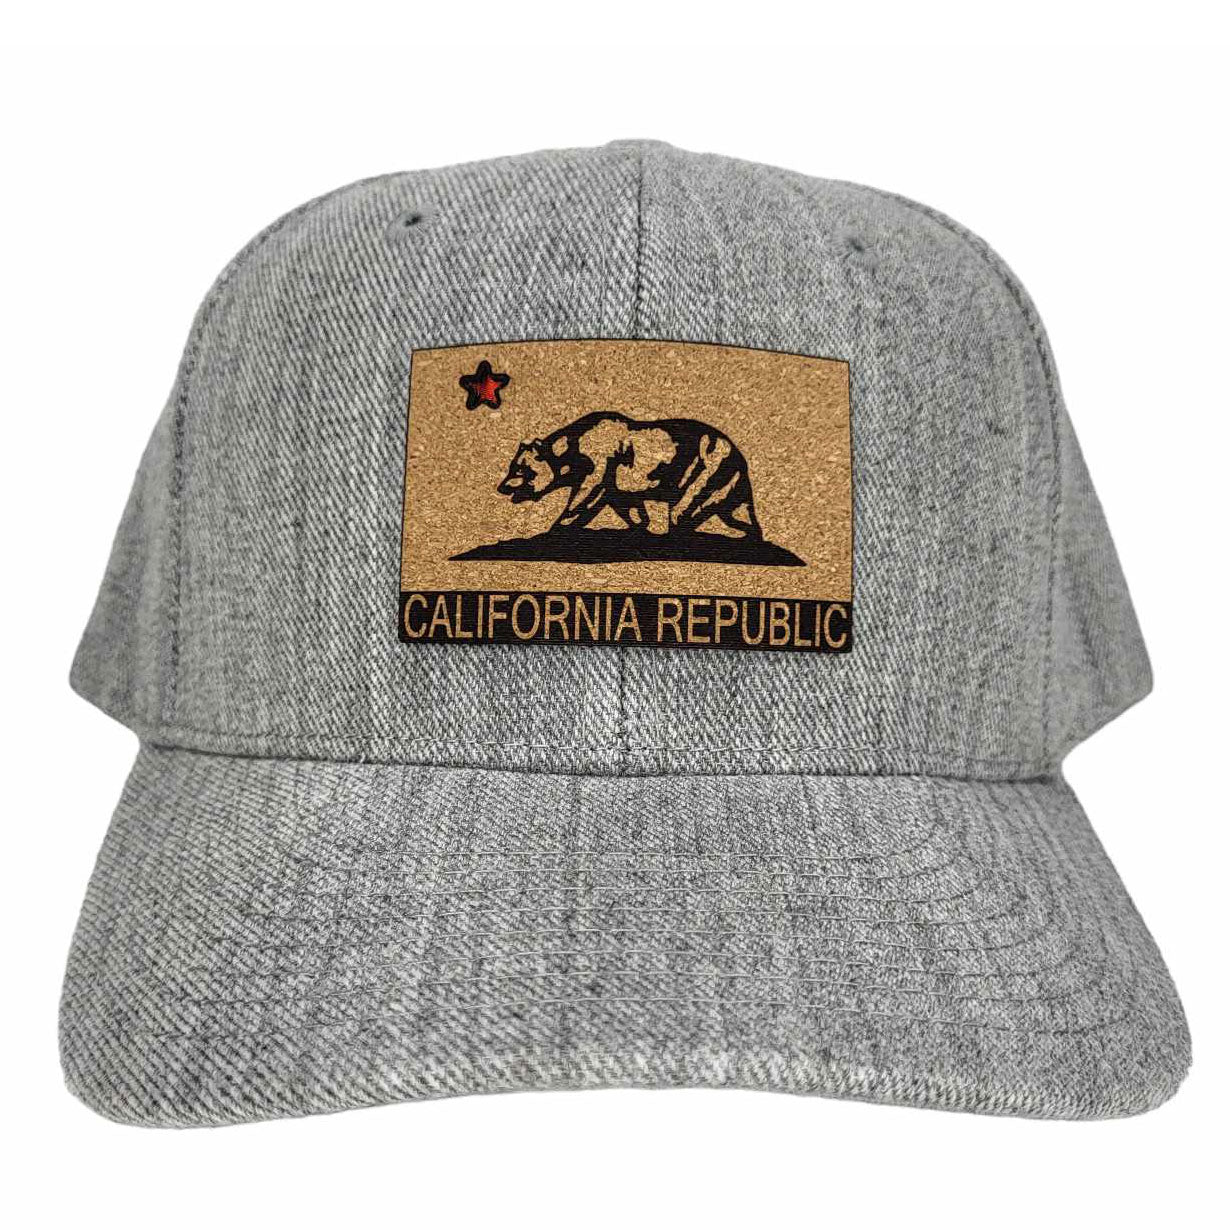 The Californian Hat